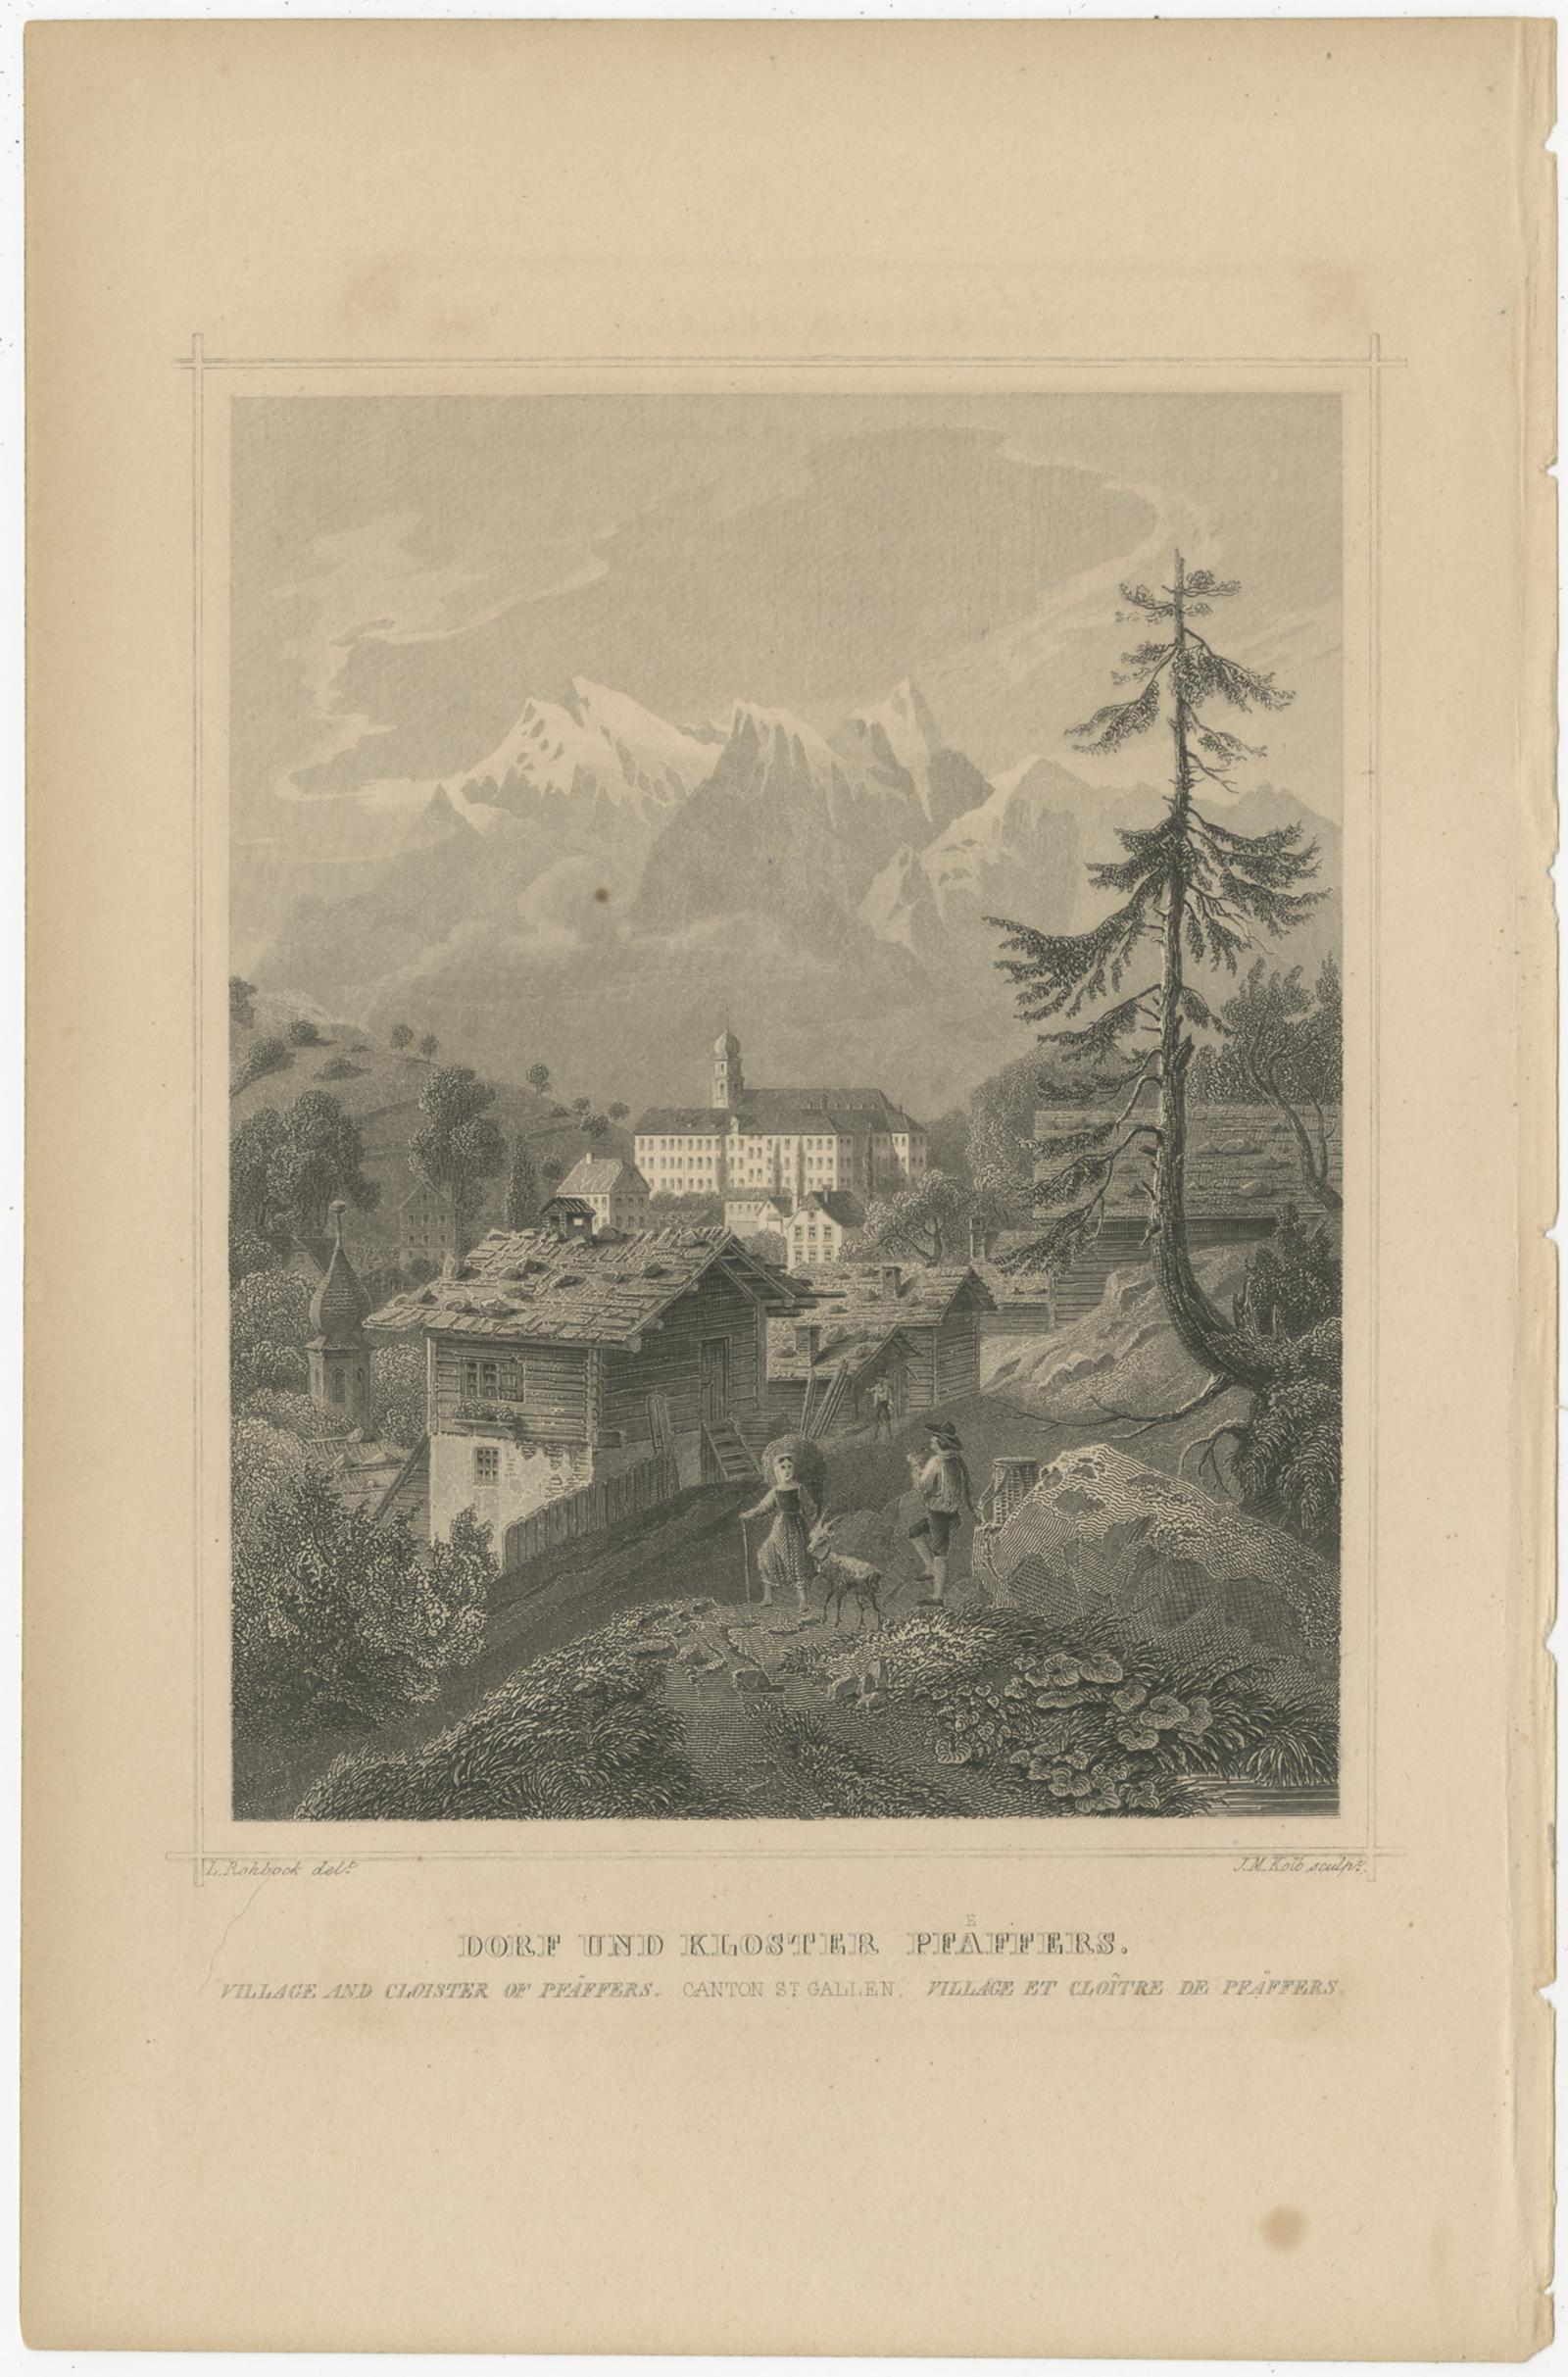 Antique print titled 'Dorf und Kloster Pfaeffers, Canton St. Gallen'. View of the village of Pfäfers, in the canton of St. Gallen in Switzerland. 

Engraved by G.M. Kurz after Rohbock. Published circa 1860.